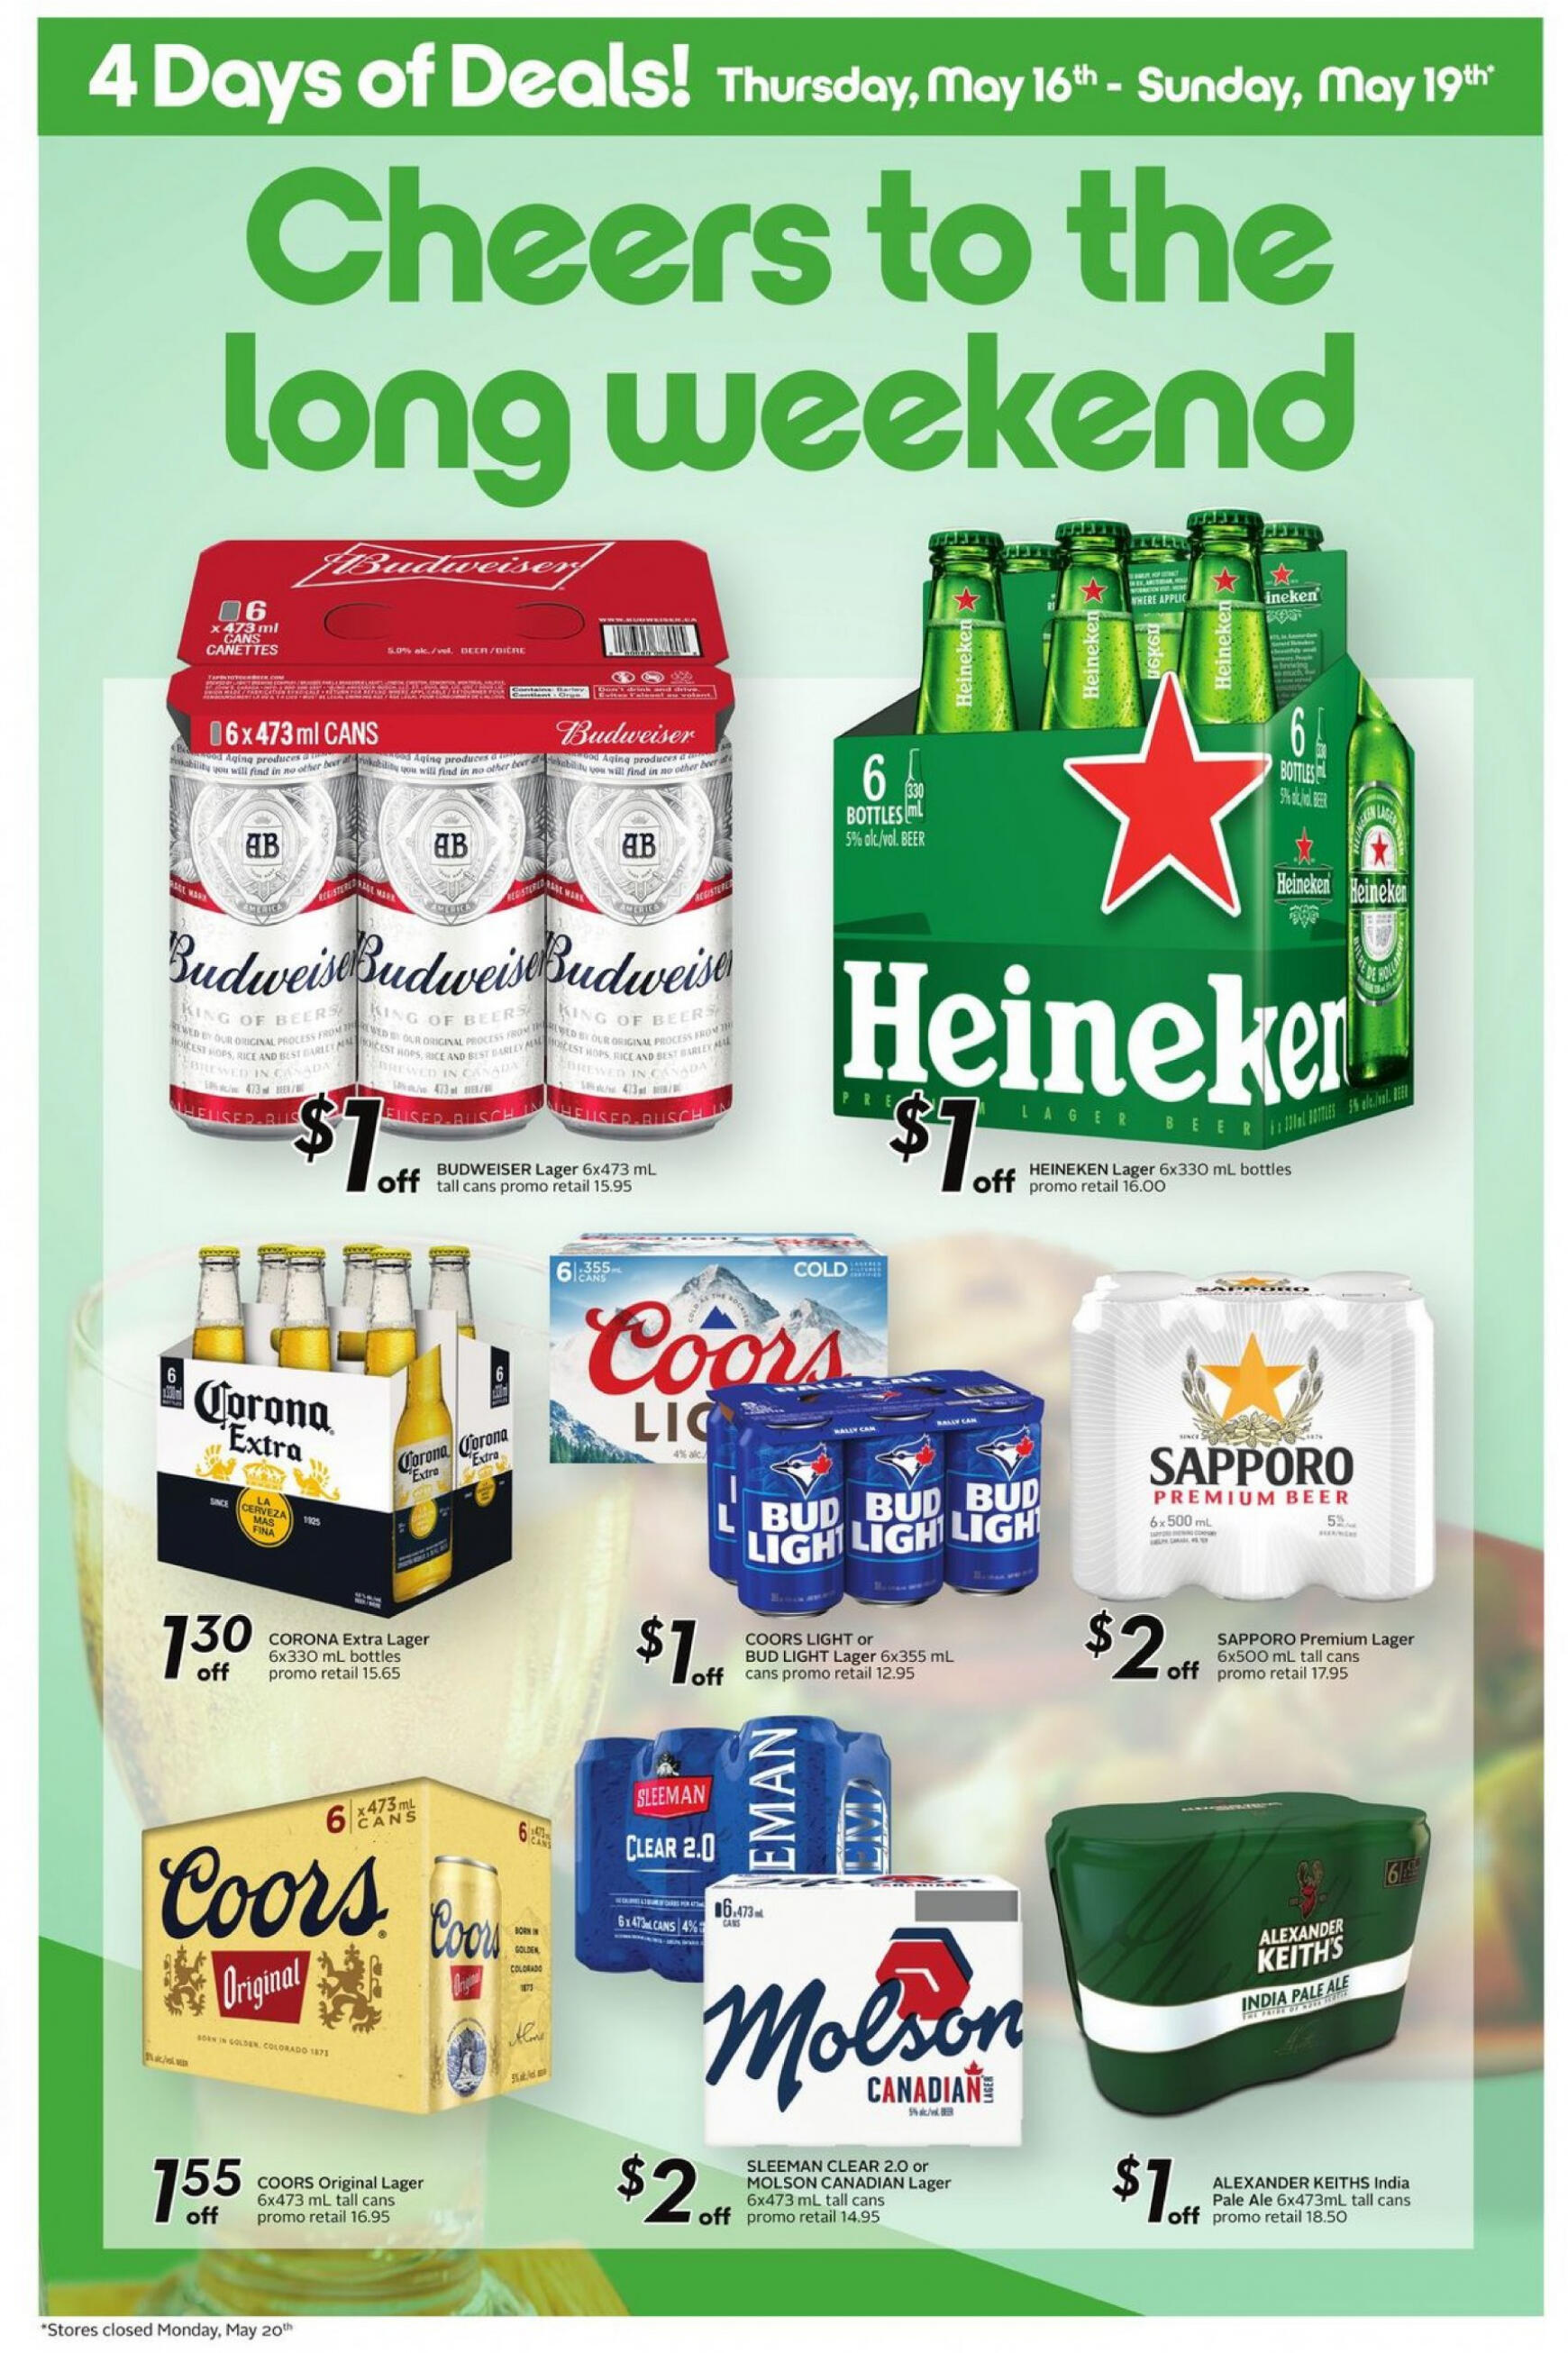 sobeys - Sobeys - Weekly Flyer - Ontario flyer current 16.05. - 22.05. - page: 8